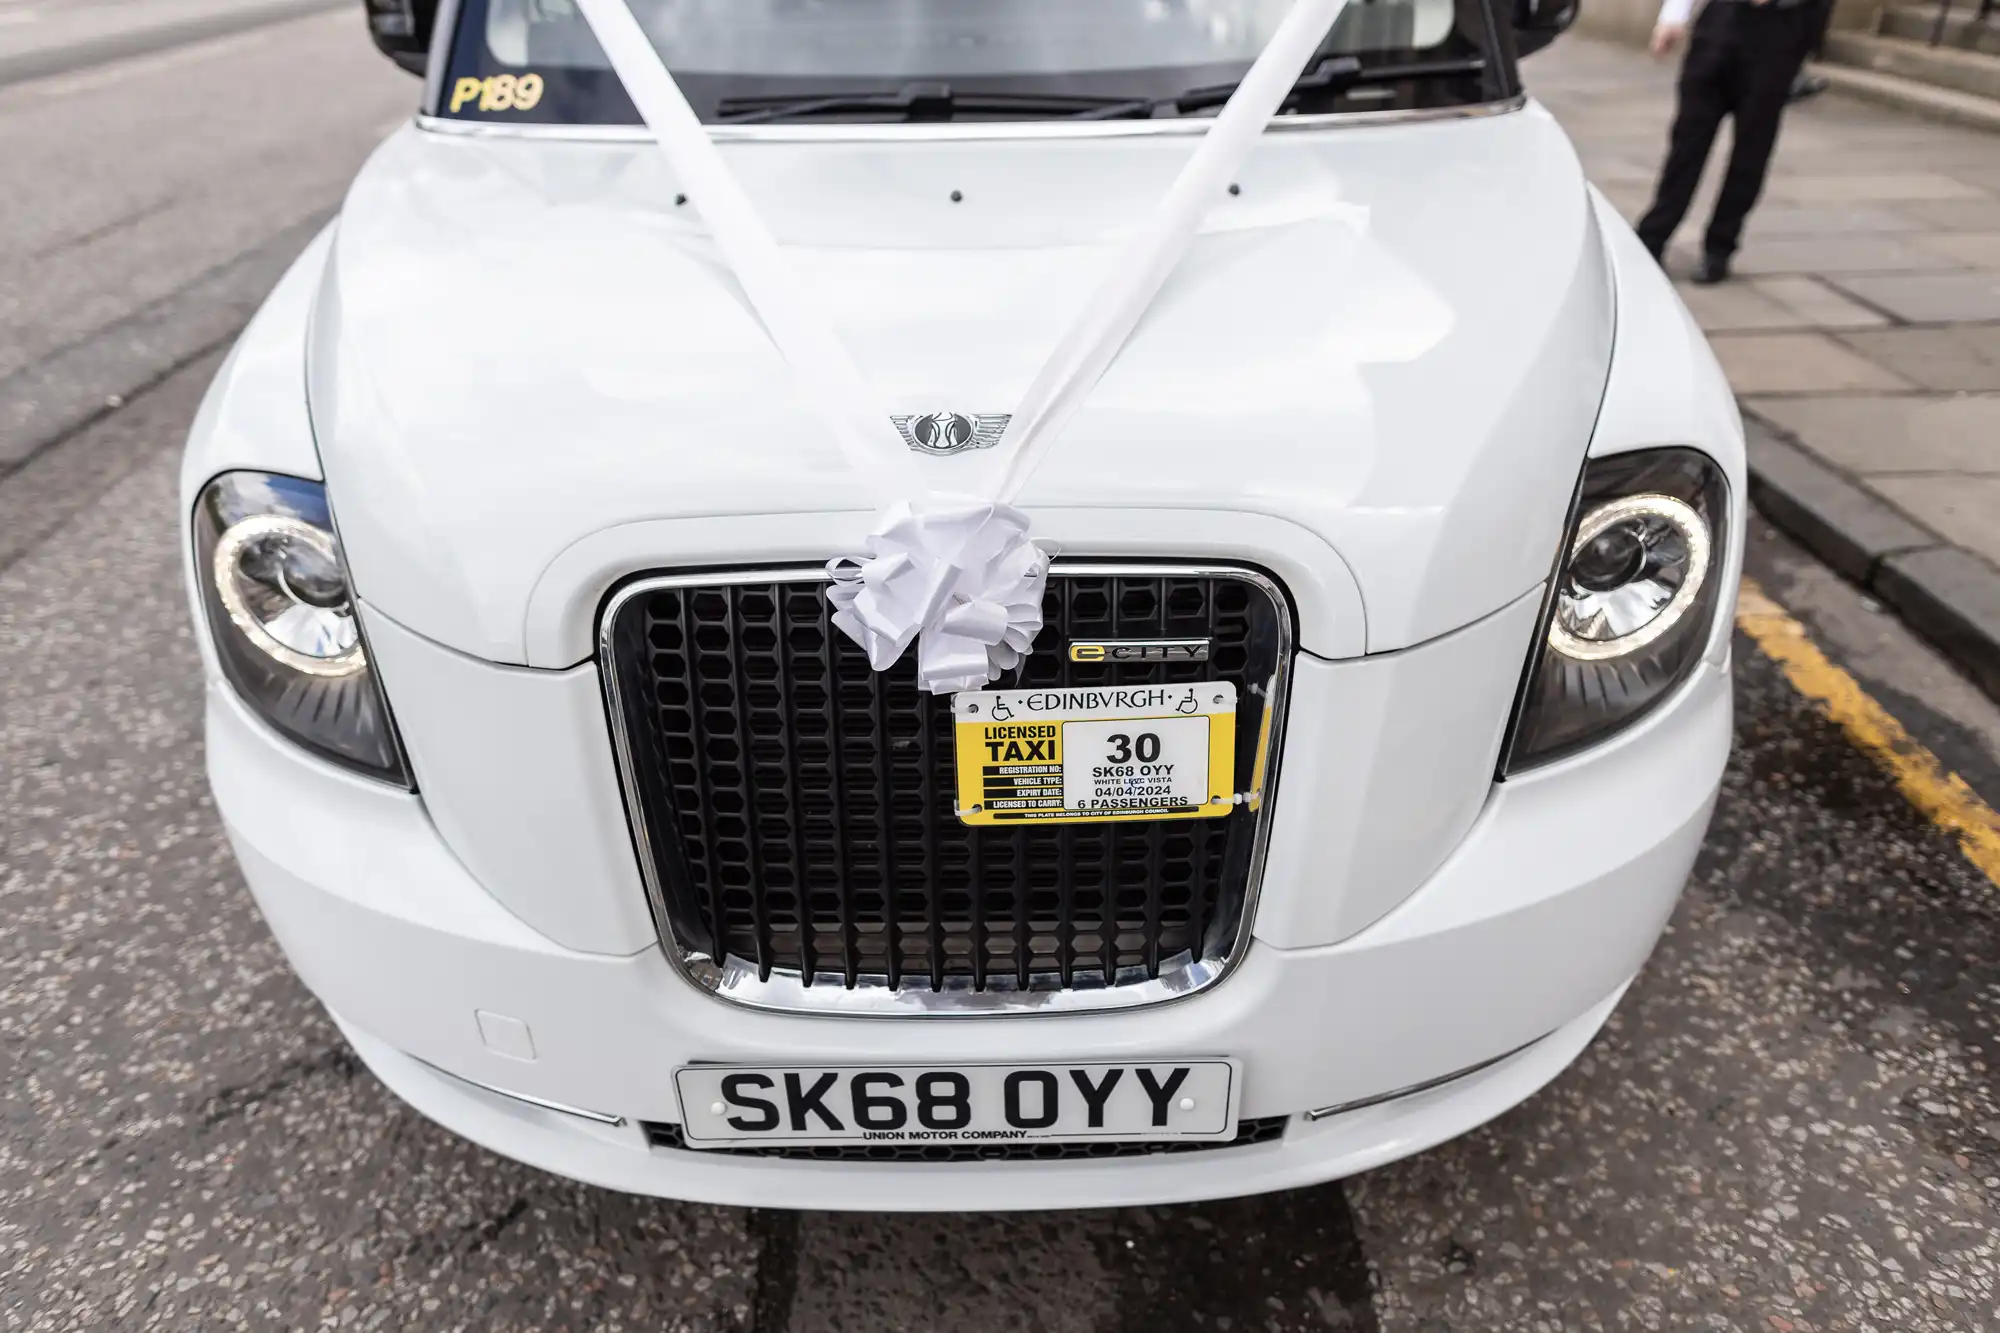 A white taxi decorated with a white ribbon on the front grille, displaying a license plate SK68 OYY and a taxi permit for Edinburgh, parked on a street.